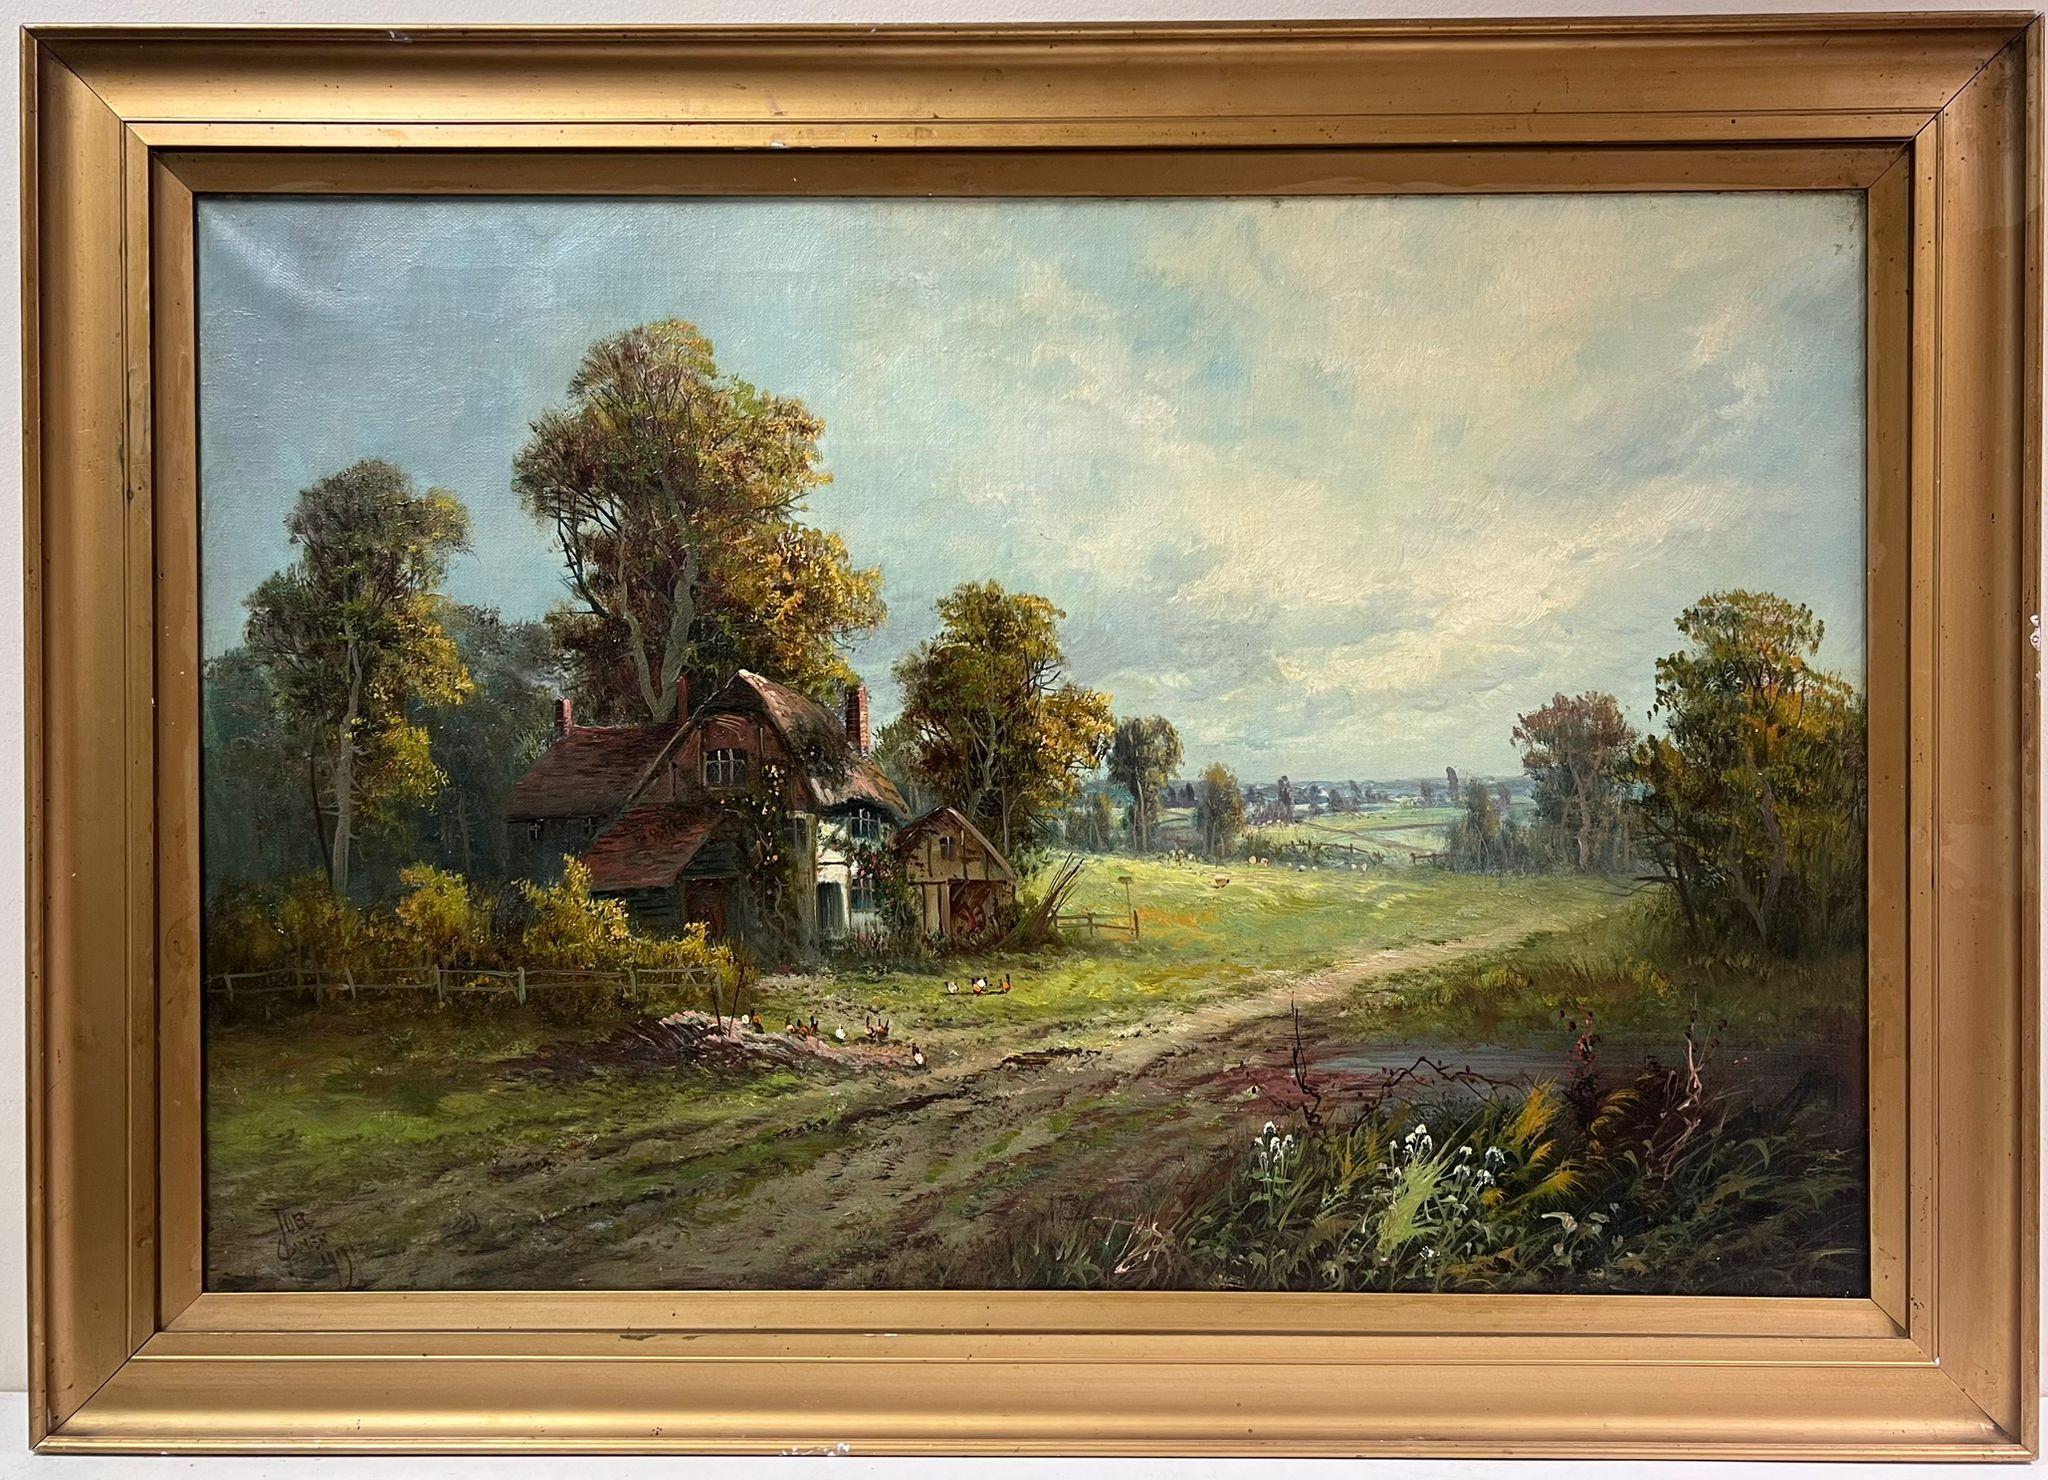 'Start of the Day, Dorking, Surrey'
signed by Joel B. Owen (British, signed and dated 1919)
oil on canvas, framed
framed: 25 x 35 inches
canvas: 20 x 30 inches
provenance: private collection, UK
condition: very good and sound condition
